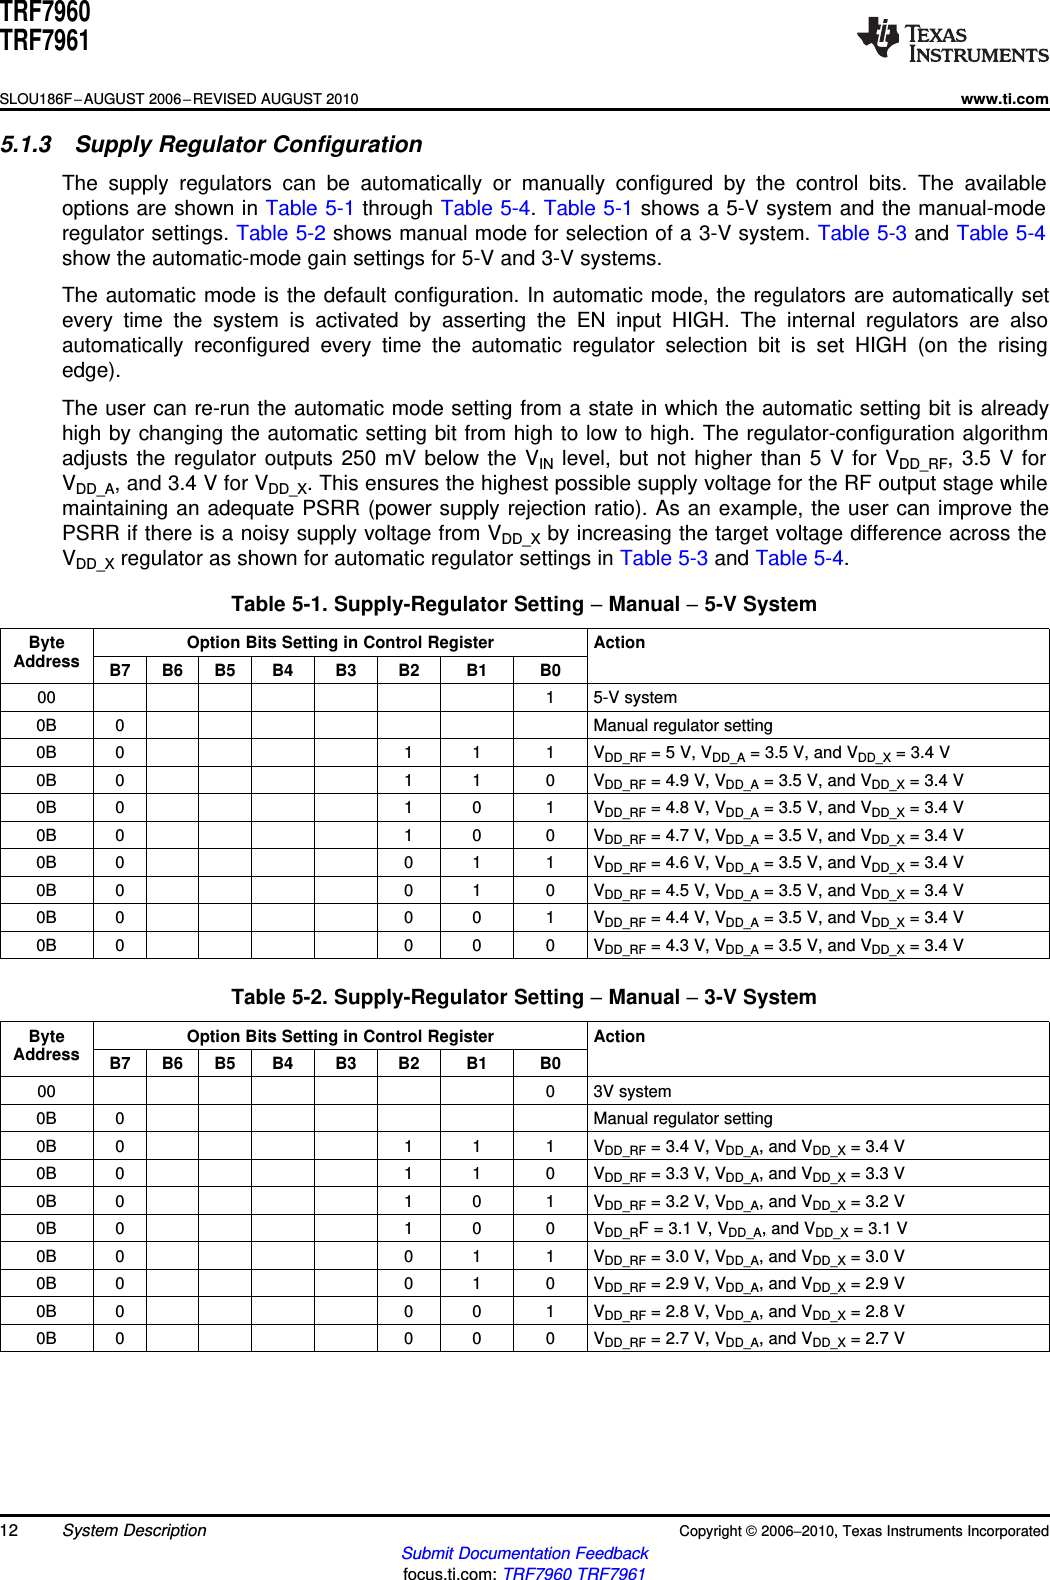 TRF7960TRF7961SLOU186F–AUGUST 2006–REVISED AUGUST 2010www.ti.com5.1.3 Supply Regulator ConfigurationThe supply regulators can be automatically or manually configured by the control bits. The availableoptions are shown in Table 5-1 through Table 5-4.Table 5-1 shows a 5-V system and the manual-moderegulator settings. Table 5-2 shows manual mode for selection of a 3-V system. Table 5-3 and Table 5-4show the automatic-mode gain settings for 5-V and 3-V systems.The automatic mode is the default configuration. In automatic mode, the regulators are automatically setevery time the system is activated by asserting the EN input HIGH. The internal regulators are alsoautomatically reconfigured every time the automatic regulator selection bit is set HIGH (on the risingedge).The user can re-run the automatic mode setting from a state in which the automatic setting bit is alreadyhigh by changing the automatic setting bit from high to low to high. The regulator-configuration algorithmadjusts the regulator outputs 250 mV below the VIN level, but not higher than 5 V for VDD_RF, 3.5 V forVDD_A, and 3.4 V for VDD_X. This ensures the highest possible supply voltage for the RF output stage whilemaintaining an adequate PSRR (power supply rejection ratio). As an example, the user can improve thePSRR if there is a noisy supply voltage from VDD_X by increasing the target voltage difference across theVDD_X regulator as shown for automatic regulator settings in Table 5-3 and Table 5-4.Table 5-1. Supply-Regulator Setting –Manual –5-V SystemByte Option Bits Setting in Control Register ActionAddress B7 B6 B5 B4 B3 B2 B1 B000 1 5-V system0B 0 Manual regulator setting0B 0 1 1 1 VDD_RF = 5 V, VDD_A = 3.5 V, and VDD_X = 3.4 V0B 0 1 1 0 VDD_RF = 4.9 V, VDD_A = 3.5 V, and VDD_X = 3.4 V0B 0 1 0 1 VDD_RF = 4.8 V, VDD_A = 3.5 V, and VDD_X = 3.4 V0B 0 1 0 0 VDD_RF = 4.7 V, VDD_A = 3.5 V, and VDD_X = 3.4 V0B 0 0 1 1 VDD_RF = 4.6 V, VDD_A = 3.5 V, and VDD_X = 3.4 V0B 0 0 1 0 VDD_RF = 4.5 V, VDD_A = 3.5 V, and VDD_X = 3.4 V0B 0 0 0 1 VDD_RF = 4.4 V, VDD_A = 3.5 V, and VDD_X = 3.4 V0B 0 0 0 0 VDD_RF = 4.3 V, VDD_A = 3.5 V, and VDD_X = 3.4 VTable 5-2. Supply-Regulator Setting –Manual –3-V SystemByte Option Bits Setting in Control Register ActionAddress B7 B6 B5 B4 B3 B2 B1 B000 0 3V system0B 0 Manual regulator setting0B 0 1 1 1 VDD_RF = 3.4 V, VDD_A, and VDD_X = 3.4 V0B 0 1 1 0 VDD_RF = 3.3 V, VDD_A, and VDD_X = 3.3 V0B 0 1 0 1 VDD_RF = 3.2 V, VDD_A, and VDD_X = 3.2 V0B 0 1 0 0 VDD_RF = 3.1 V, VDD_A, and VDD_X = 3.1 V0B 0 0 1 1 VDD_RF = 3.0 V, VDD_A, and VDD_X = 3.0 V0B 0 0 1 0 VDD_RF = 2.9 V, VDD_A, and VDD_X = 2.9 V0B 0 0 0 1 VDD_RF = 2.8 V, VDD_A, and VDD_X = 2.8 V0B 0 0 0 0 VDD_RF = 2.7 V, VDD_A, and VDD_X = 2.7 V12 System Description Copyright ©2006–2010, Texas Instruments IncorporatedSubmit Documentation Feedbackfocus.ti.com: TRF7960 TRF7961